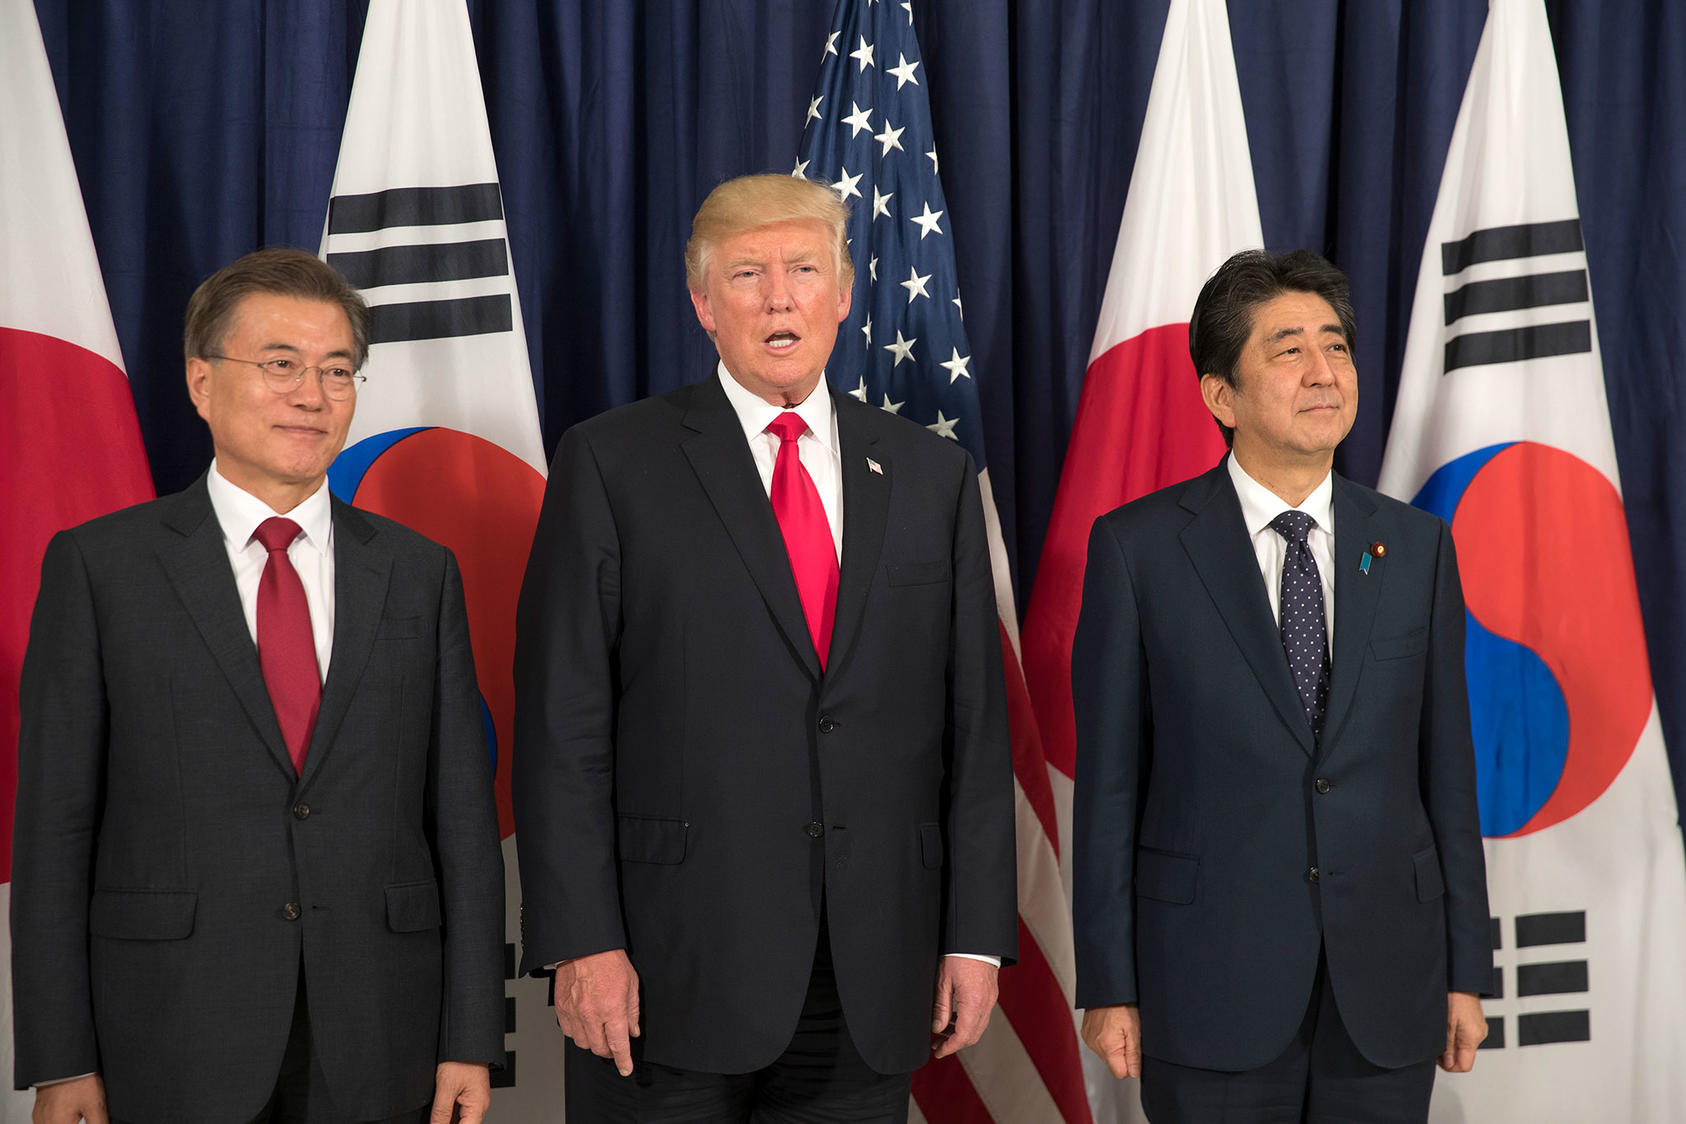 South Korean President Moon Jae-in, President Donald Trump and Japanese Prime Minister Shinzo Abe before the start of the Northeast Asia Security dinner. (Stephen Crowley/The New York Times)